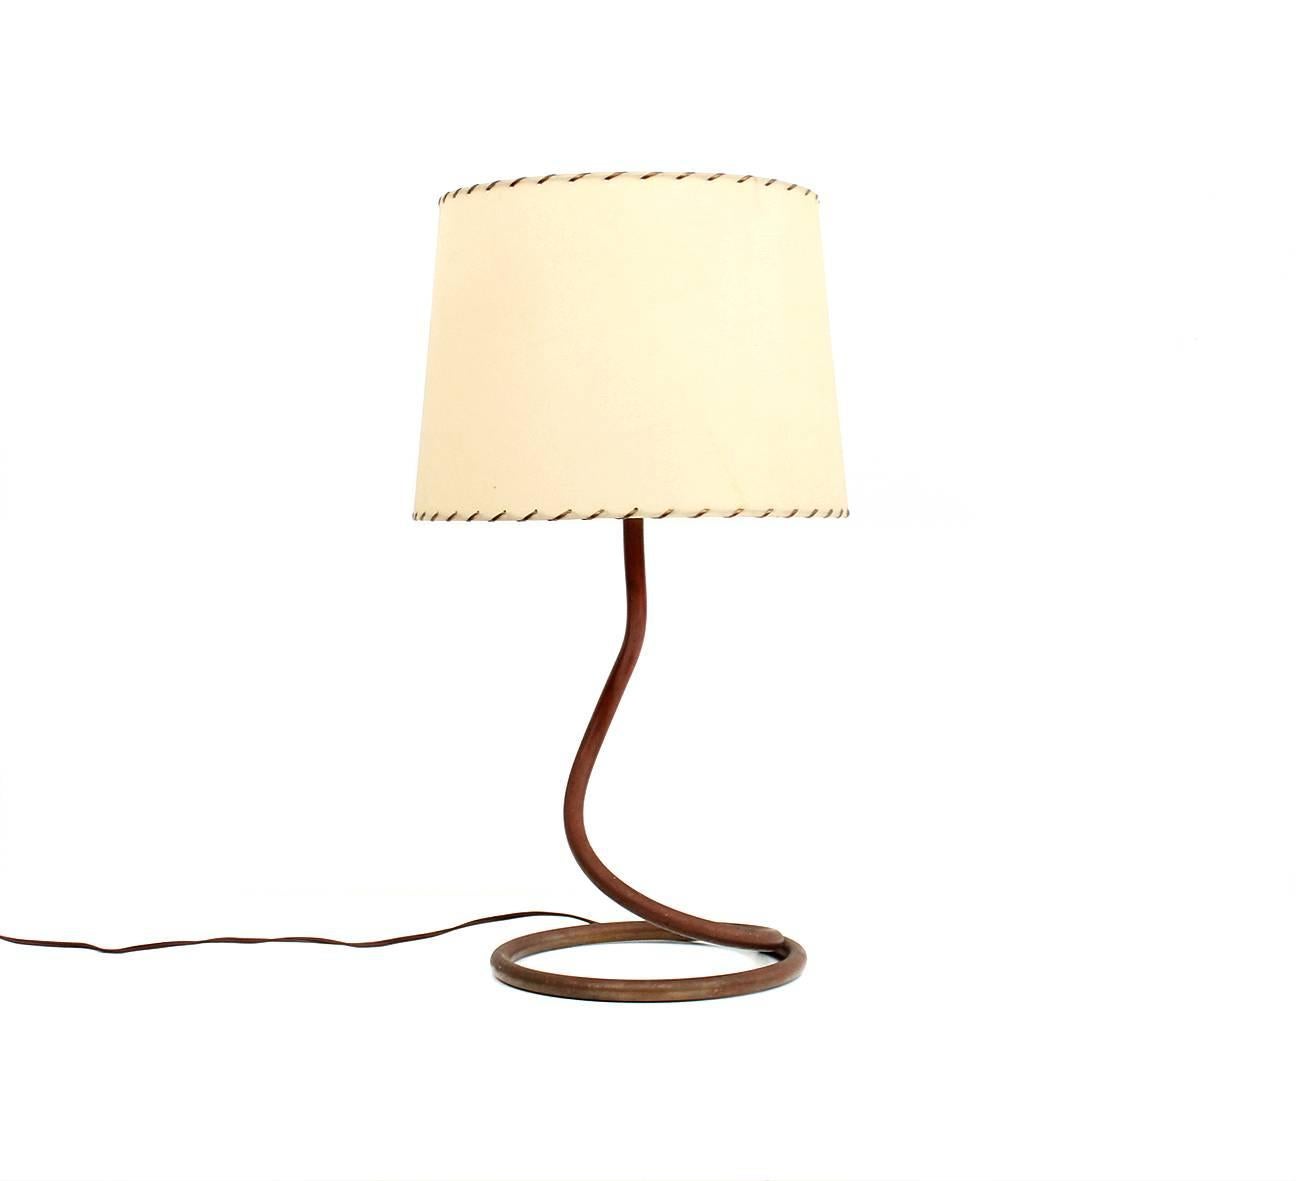 Early modernist coil shaped table lamp attributed to Kurt Versen. Lamp retains its original shade with woven wire detail and a period Bakelite switch. The copper coil has developed a deep red patina over time. Lamp comes from a collection that